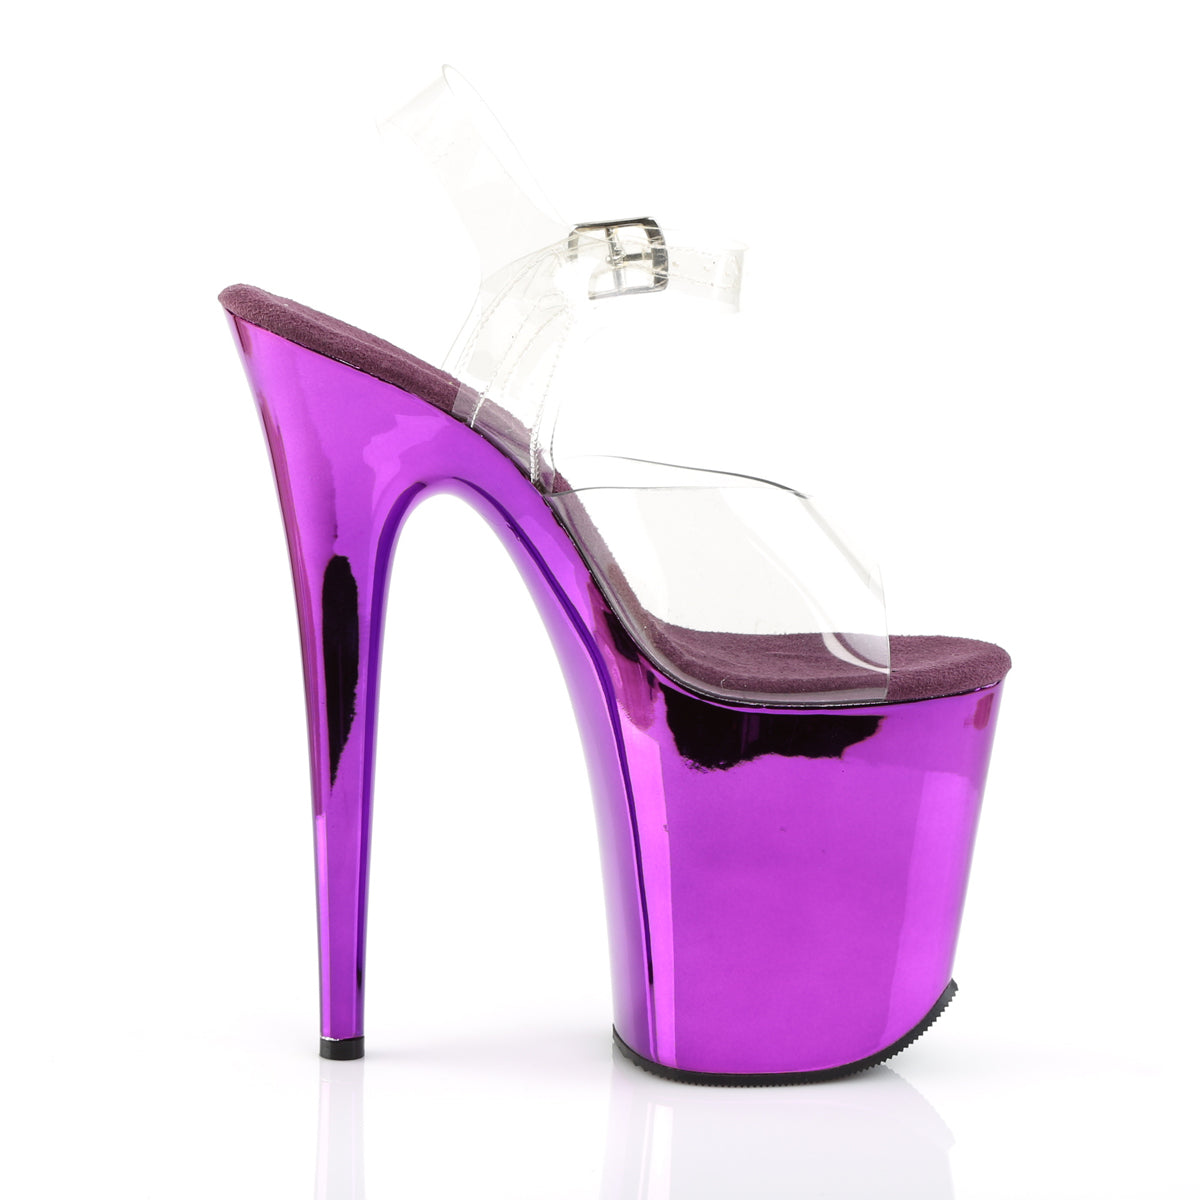 FLAMINGO-808 8 Inch Heel ClearPurple Chrome Strippers Shoes-Pleaser- Sexy Shoes Fetish Heels